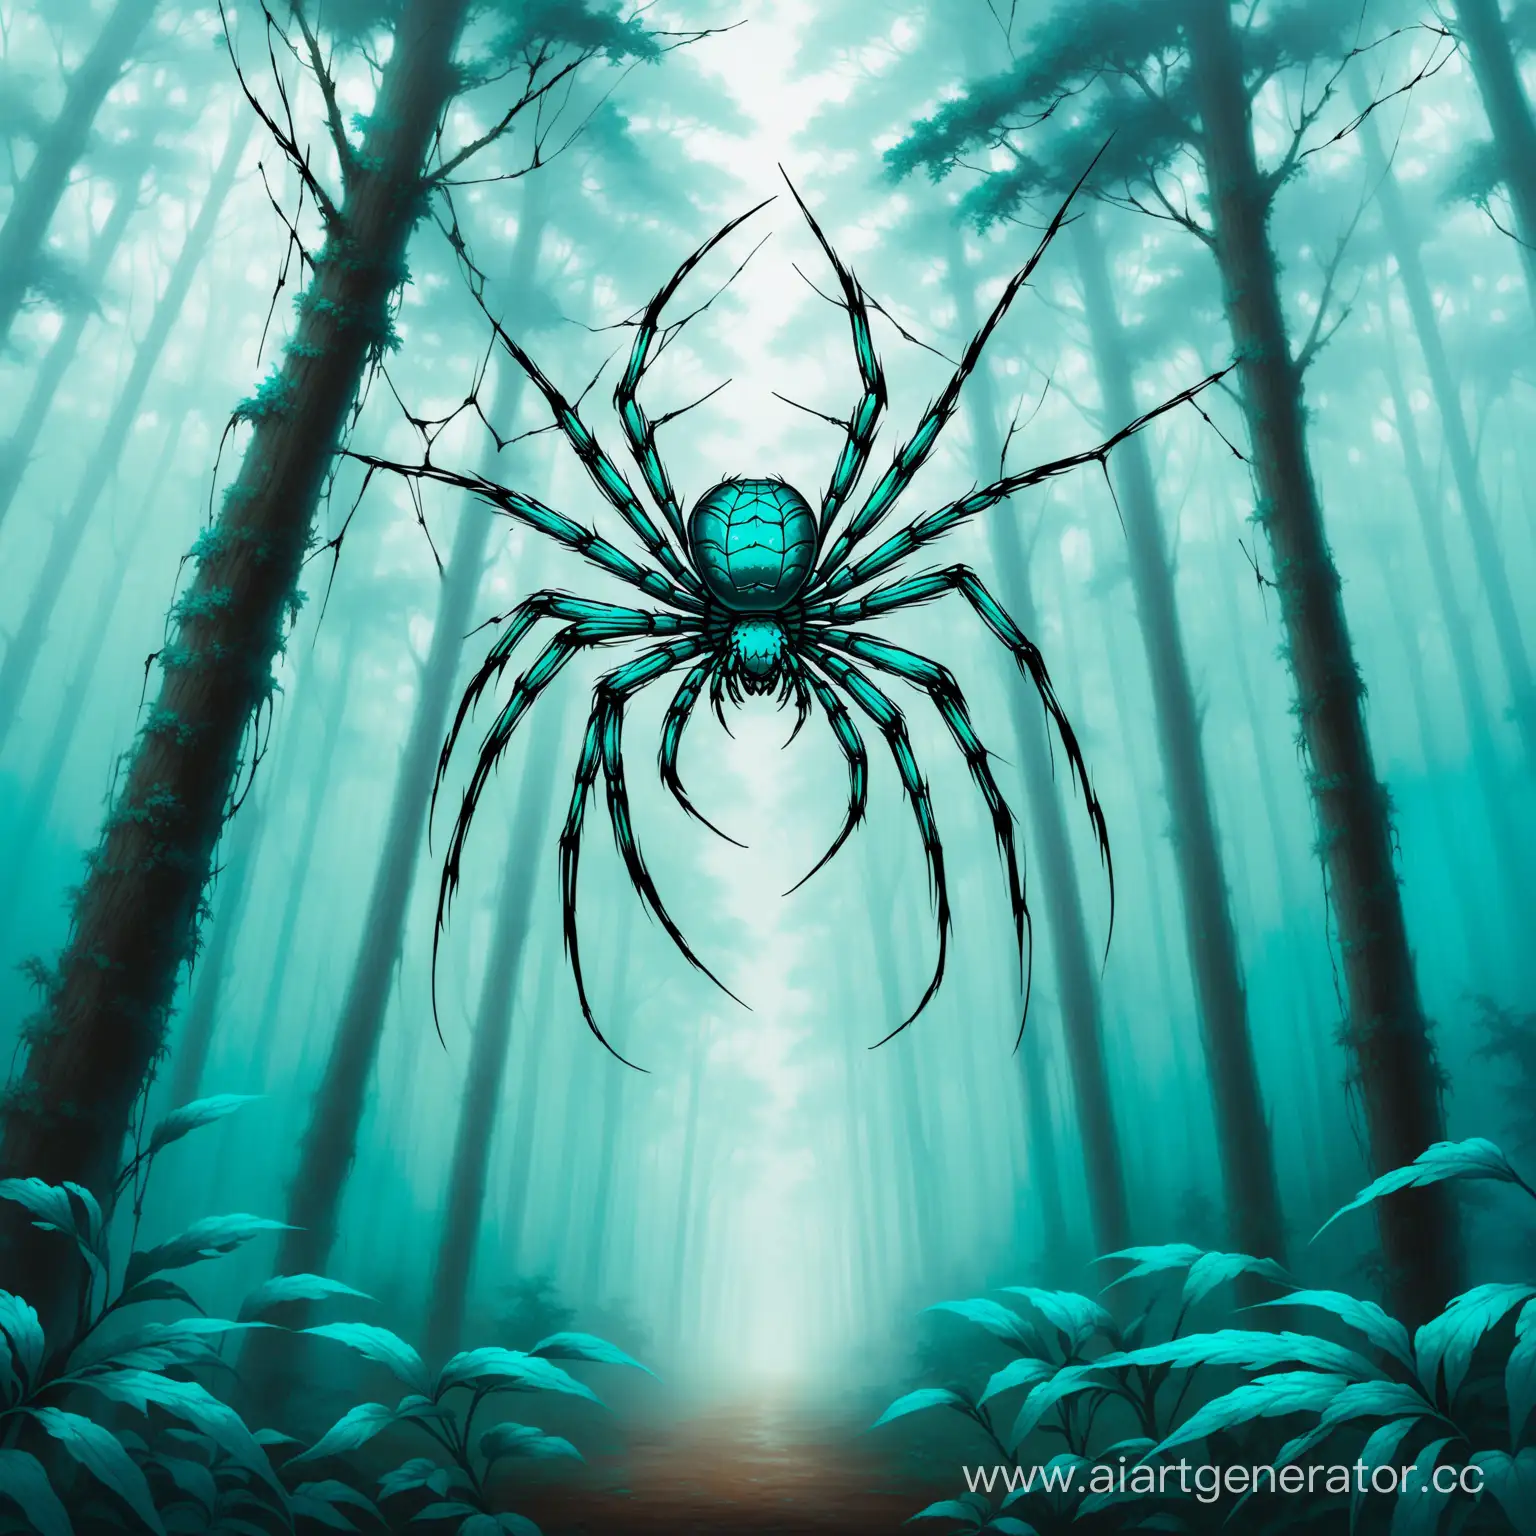 Turquoise-Spider-Weaving-Web-in-Enigmatic-Misty-Forest